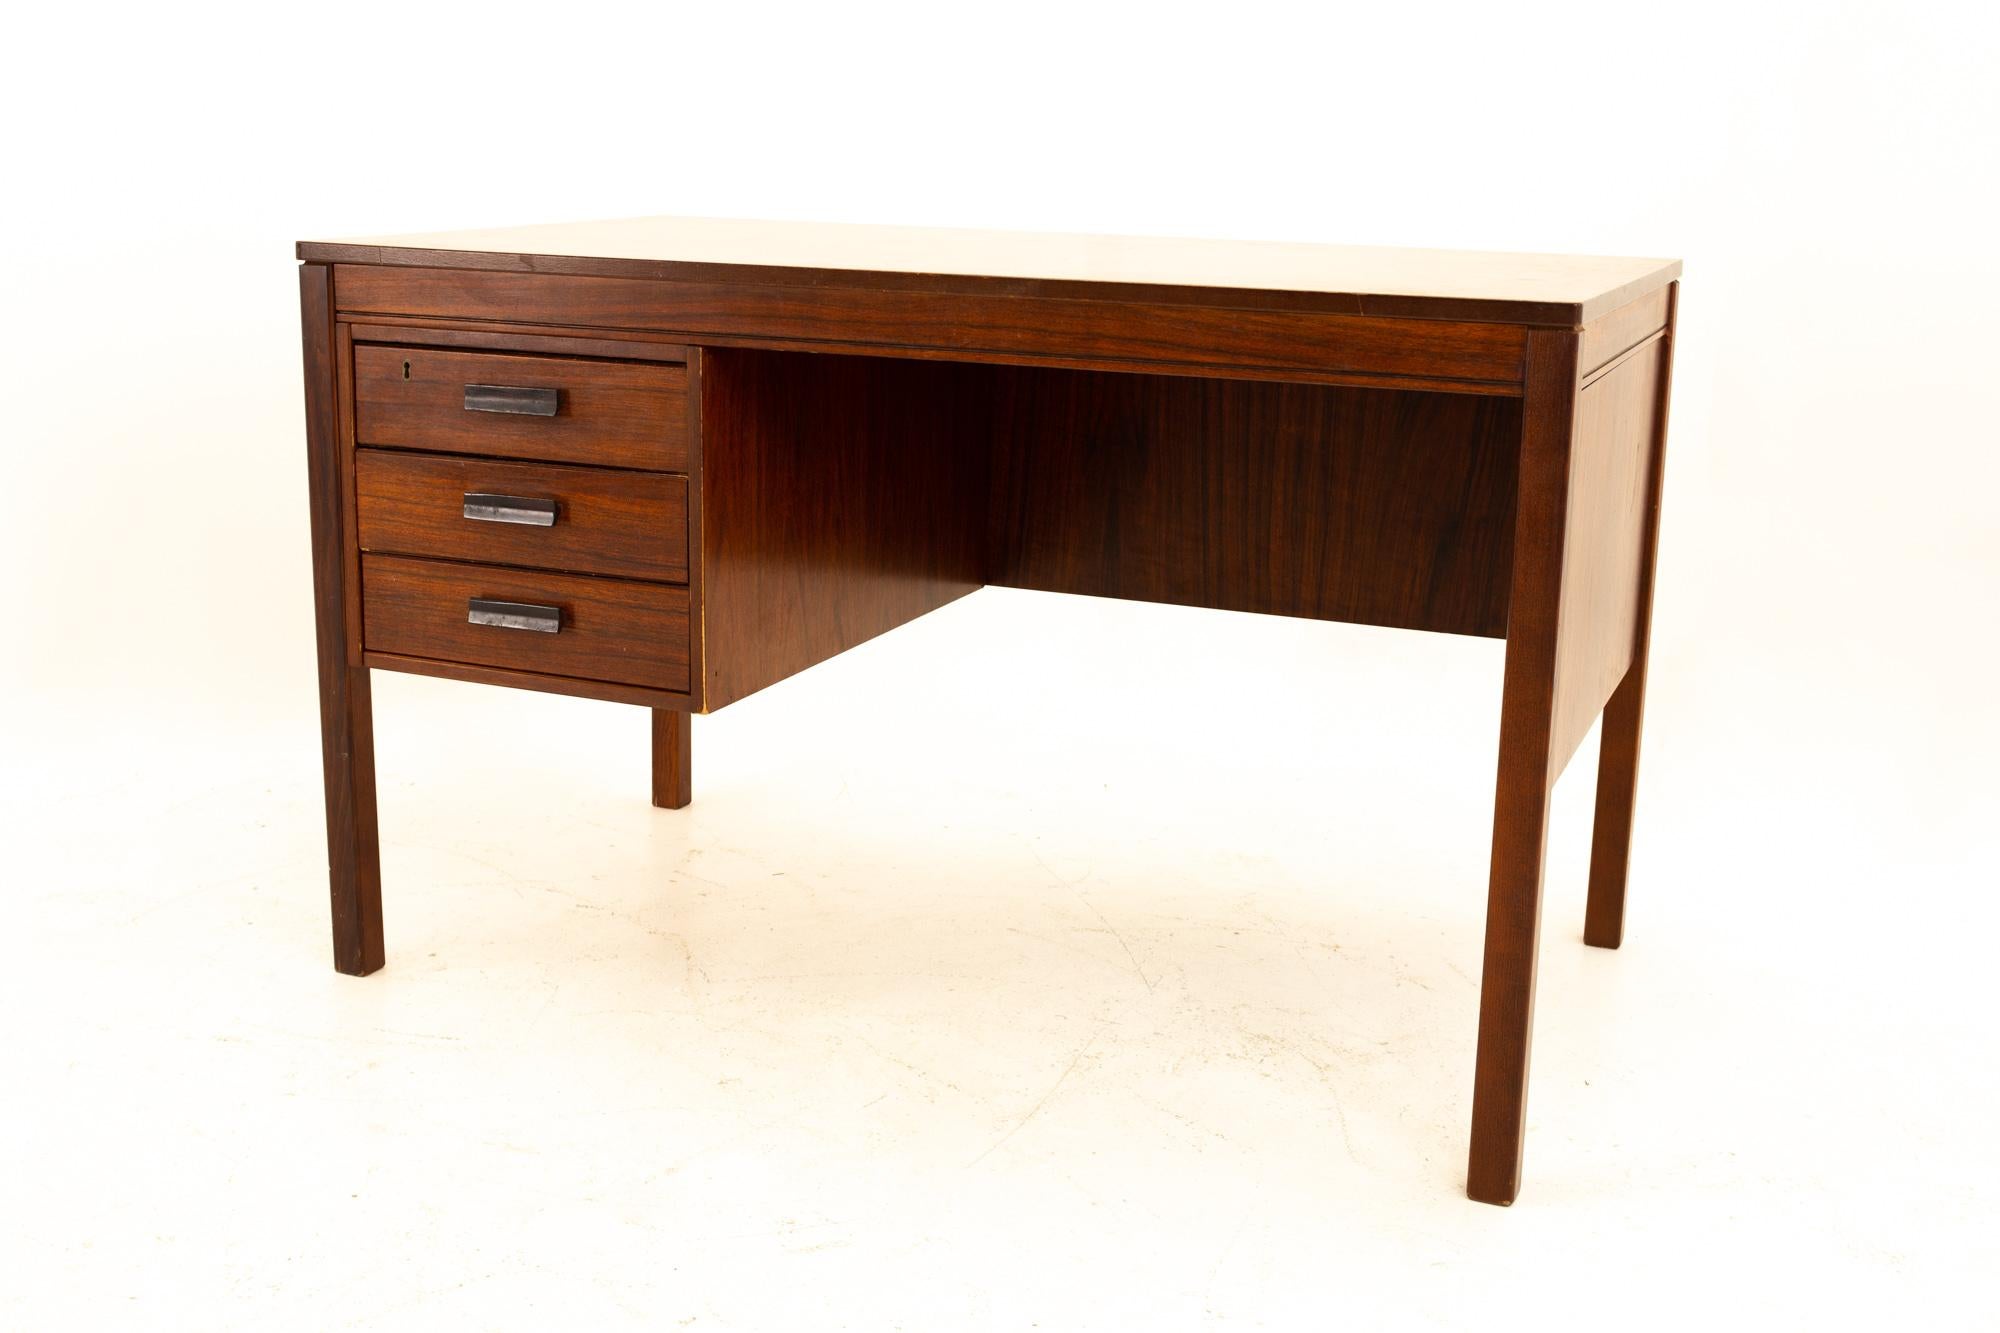 Heggen of Norway mid century rosewood desk
Desk measures: 47.5 wide x 28 deep x 29 high

All pieces of furniture can be had in what we call restored vintage condition. That means the piece is restored upon purchase so it’s free of watermarks,